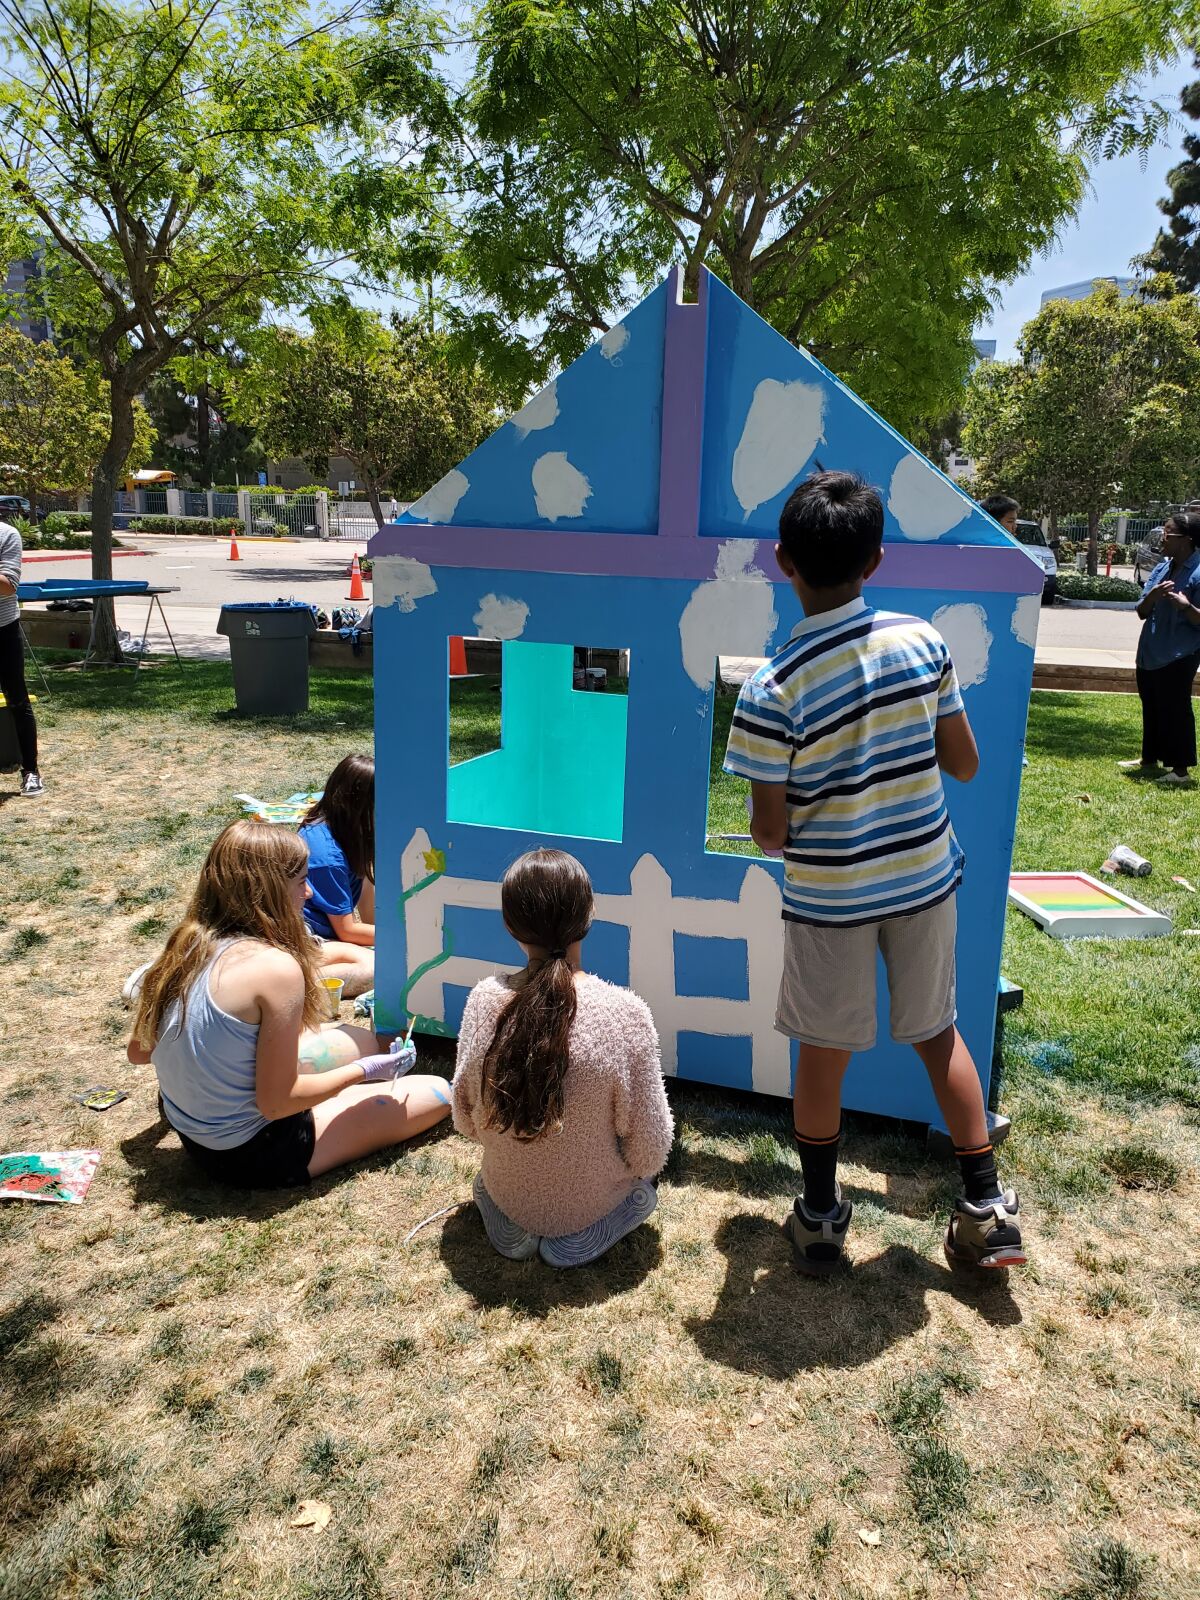 La Jolla Country Day School fifth-graders work on a garden-themed playhouse.